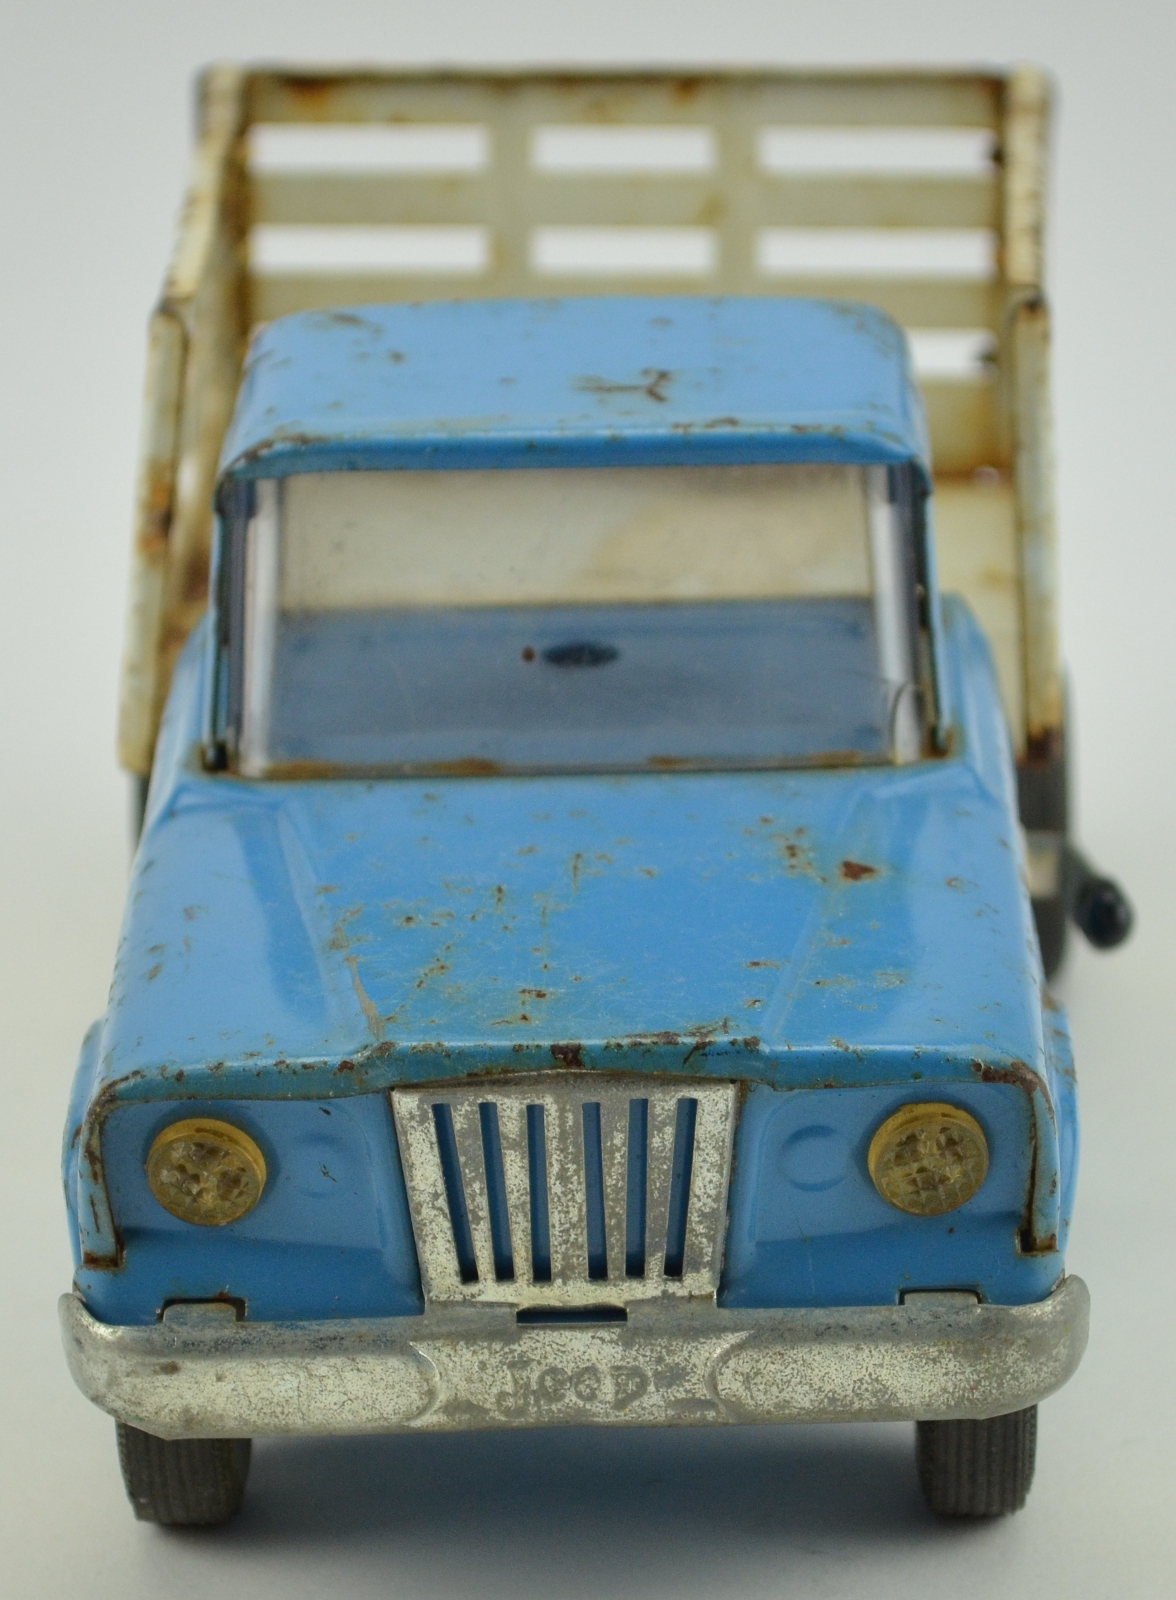 Vintage Collectible Blue Tonka Truck With White Dump Bed